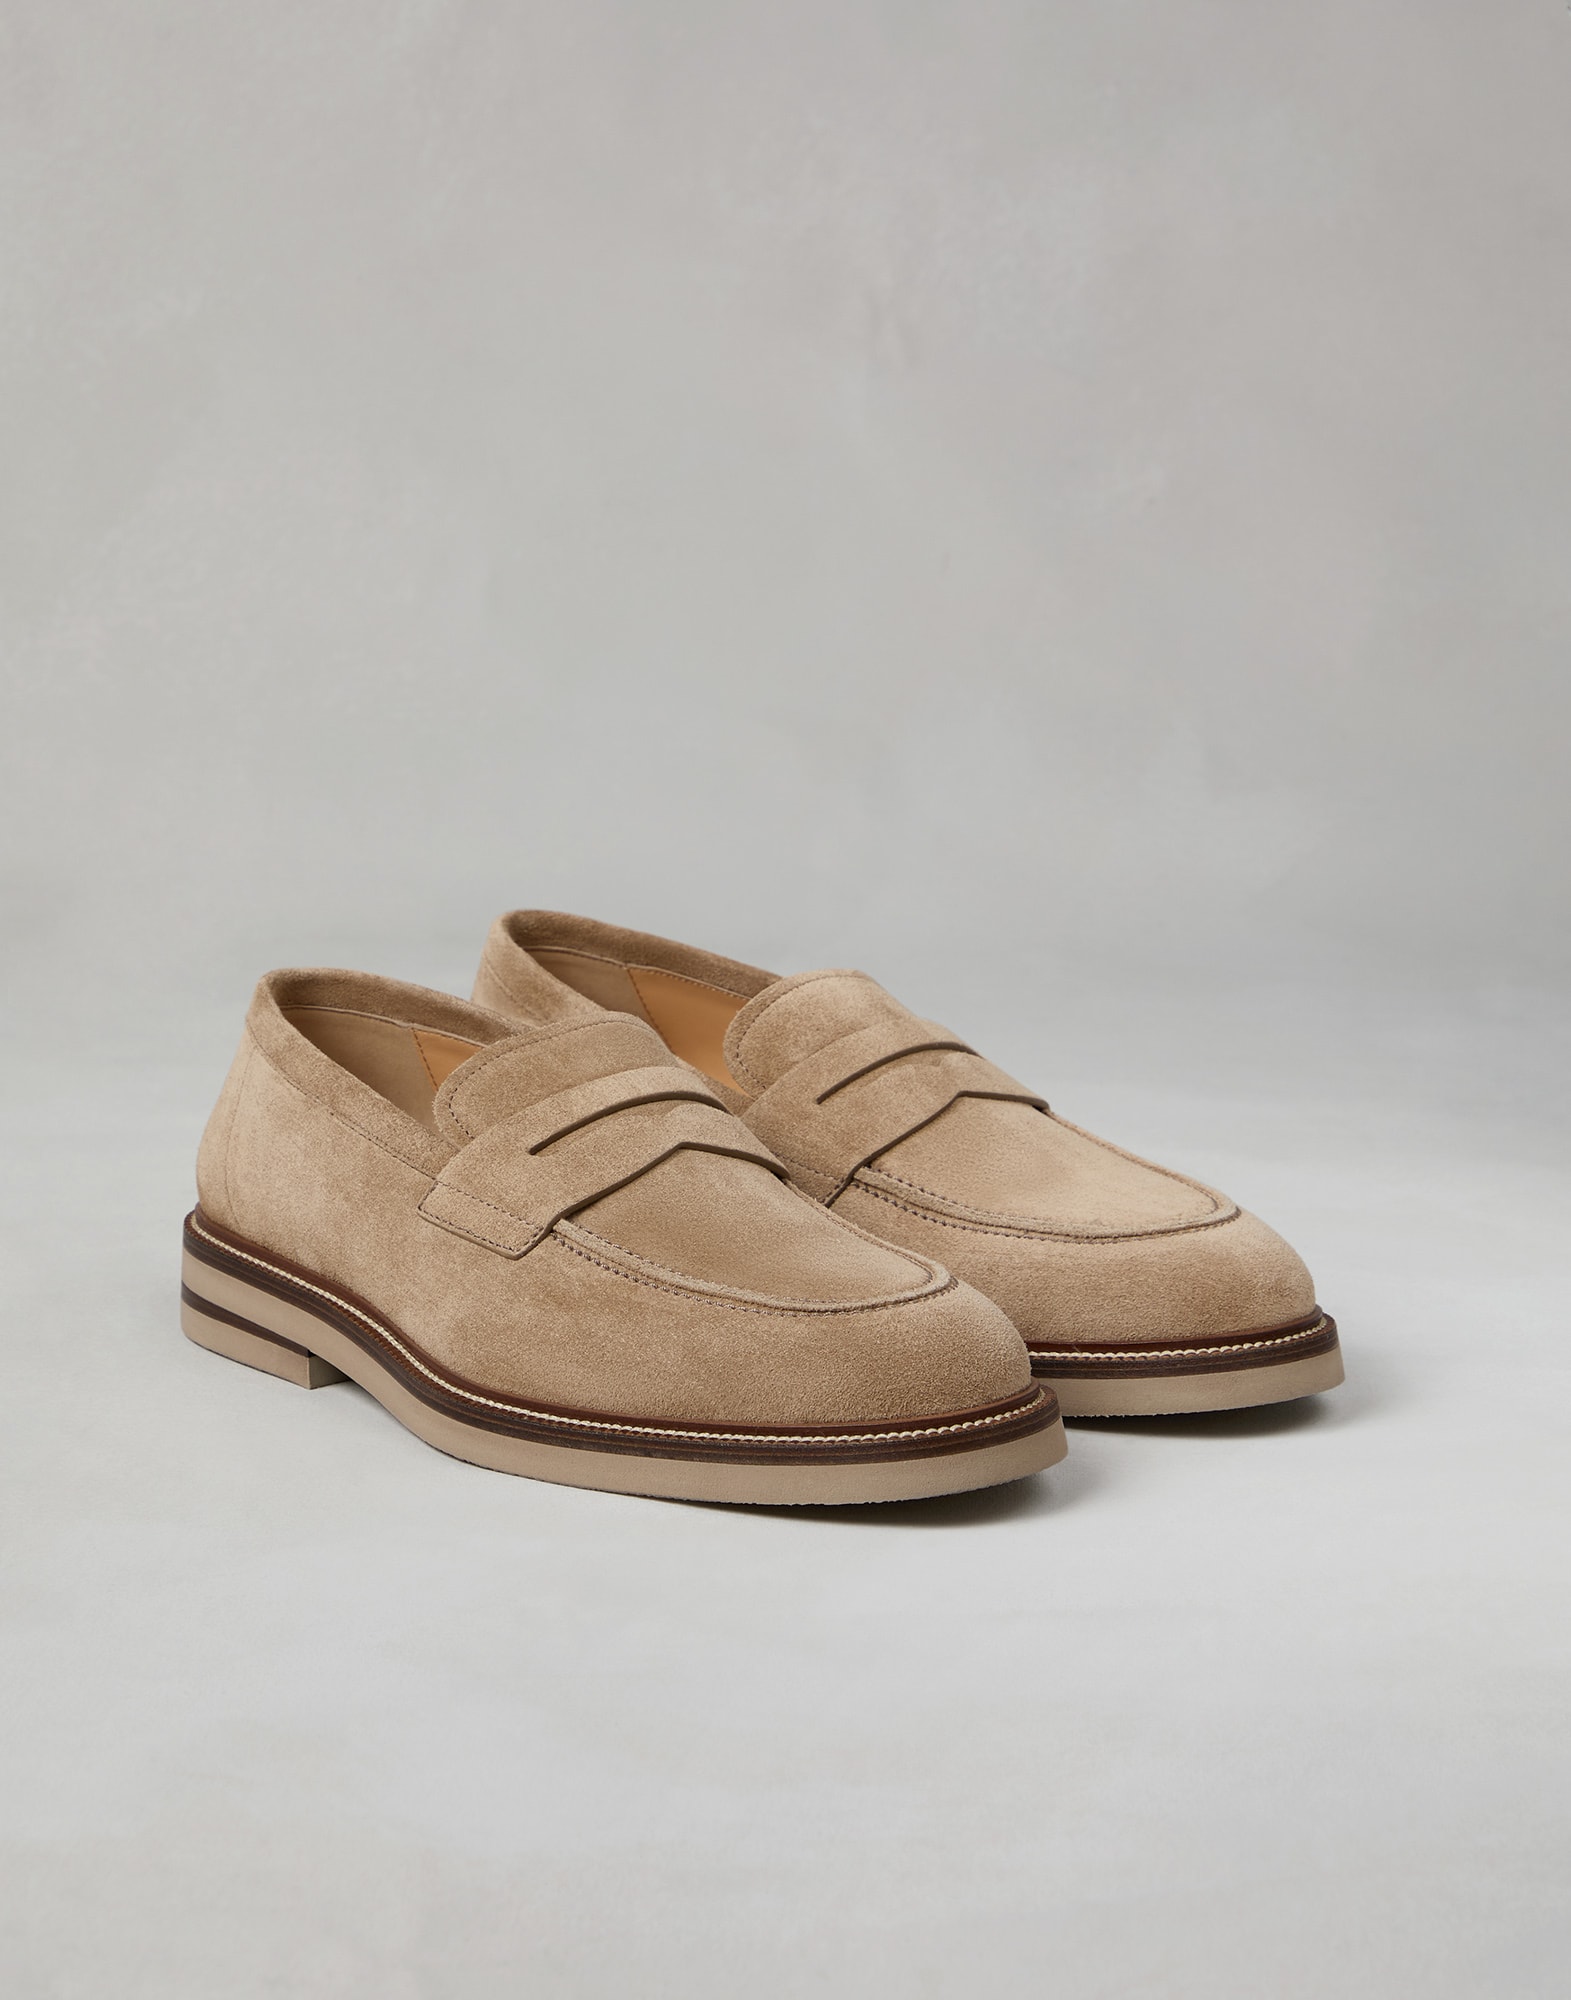 Penny Loafers - Front view